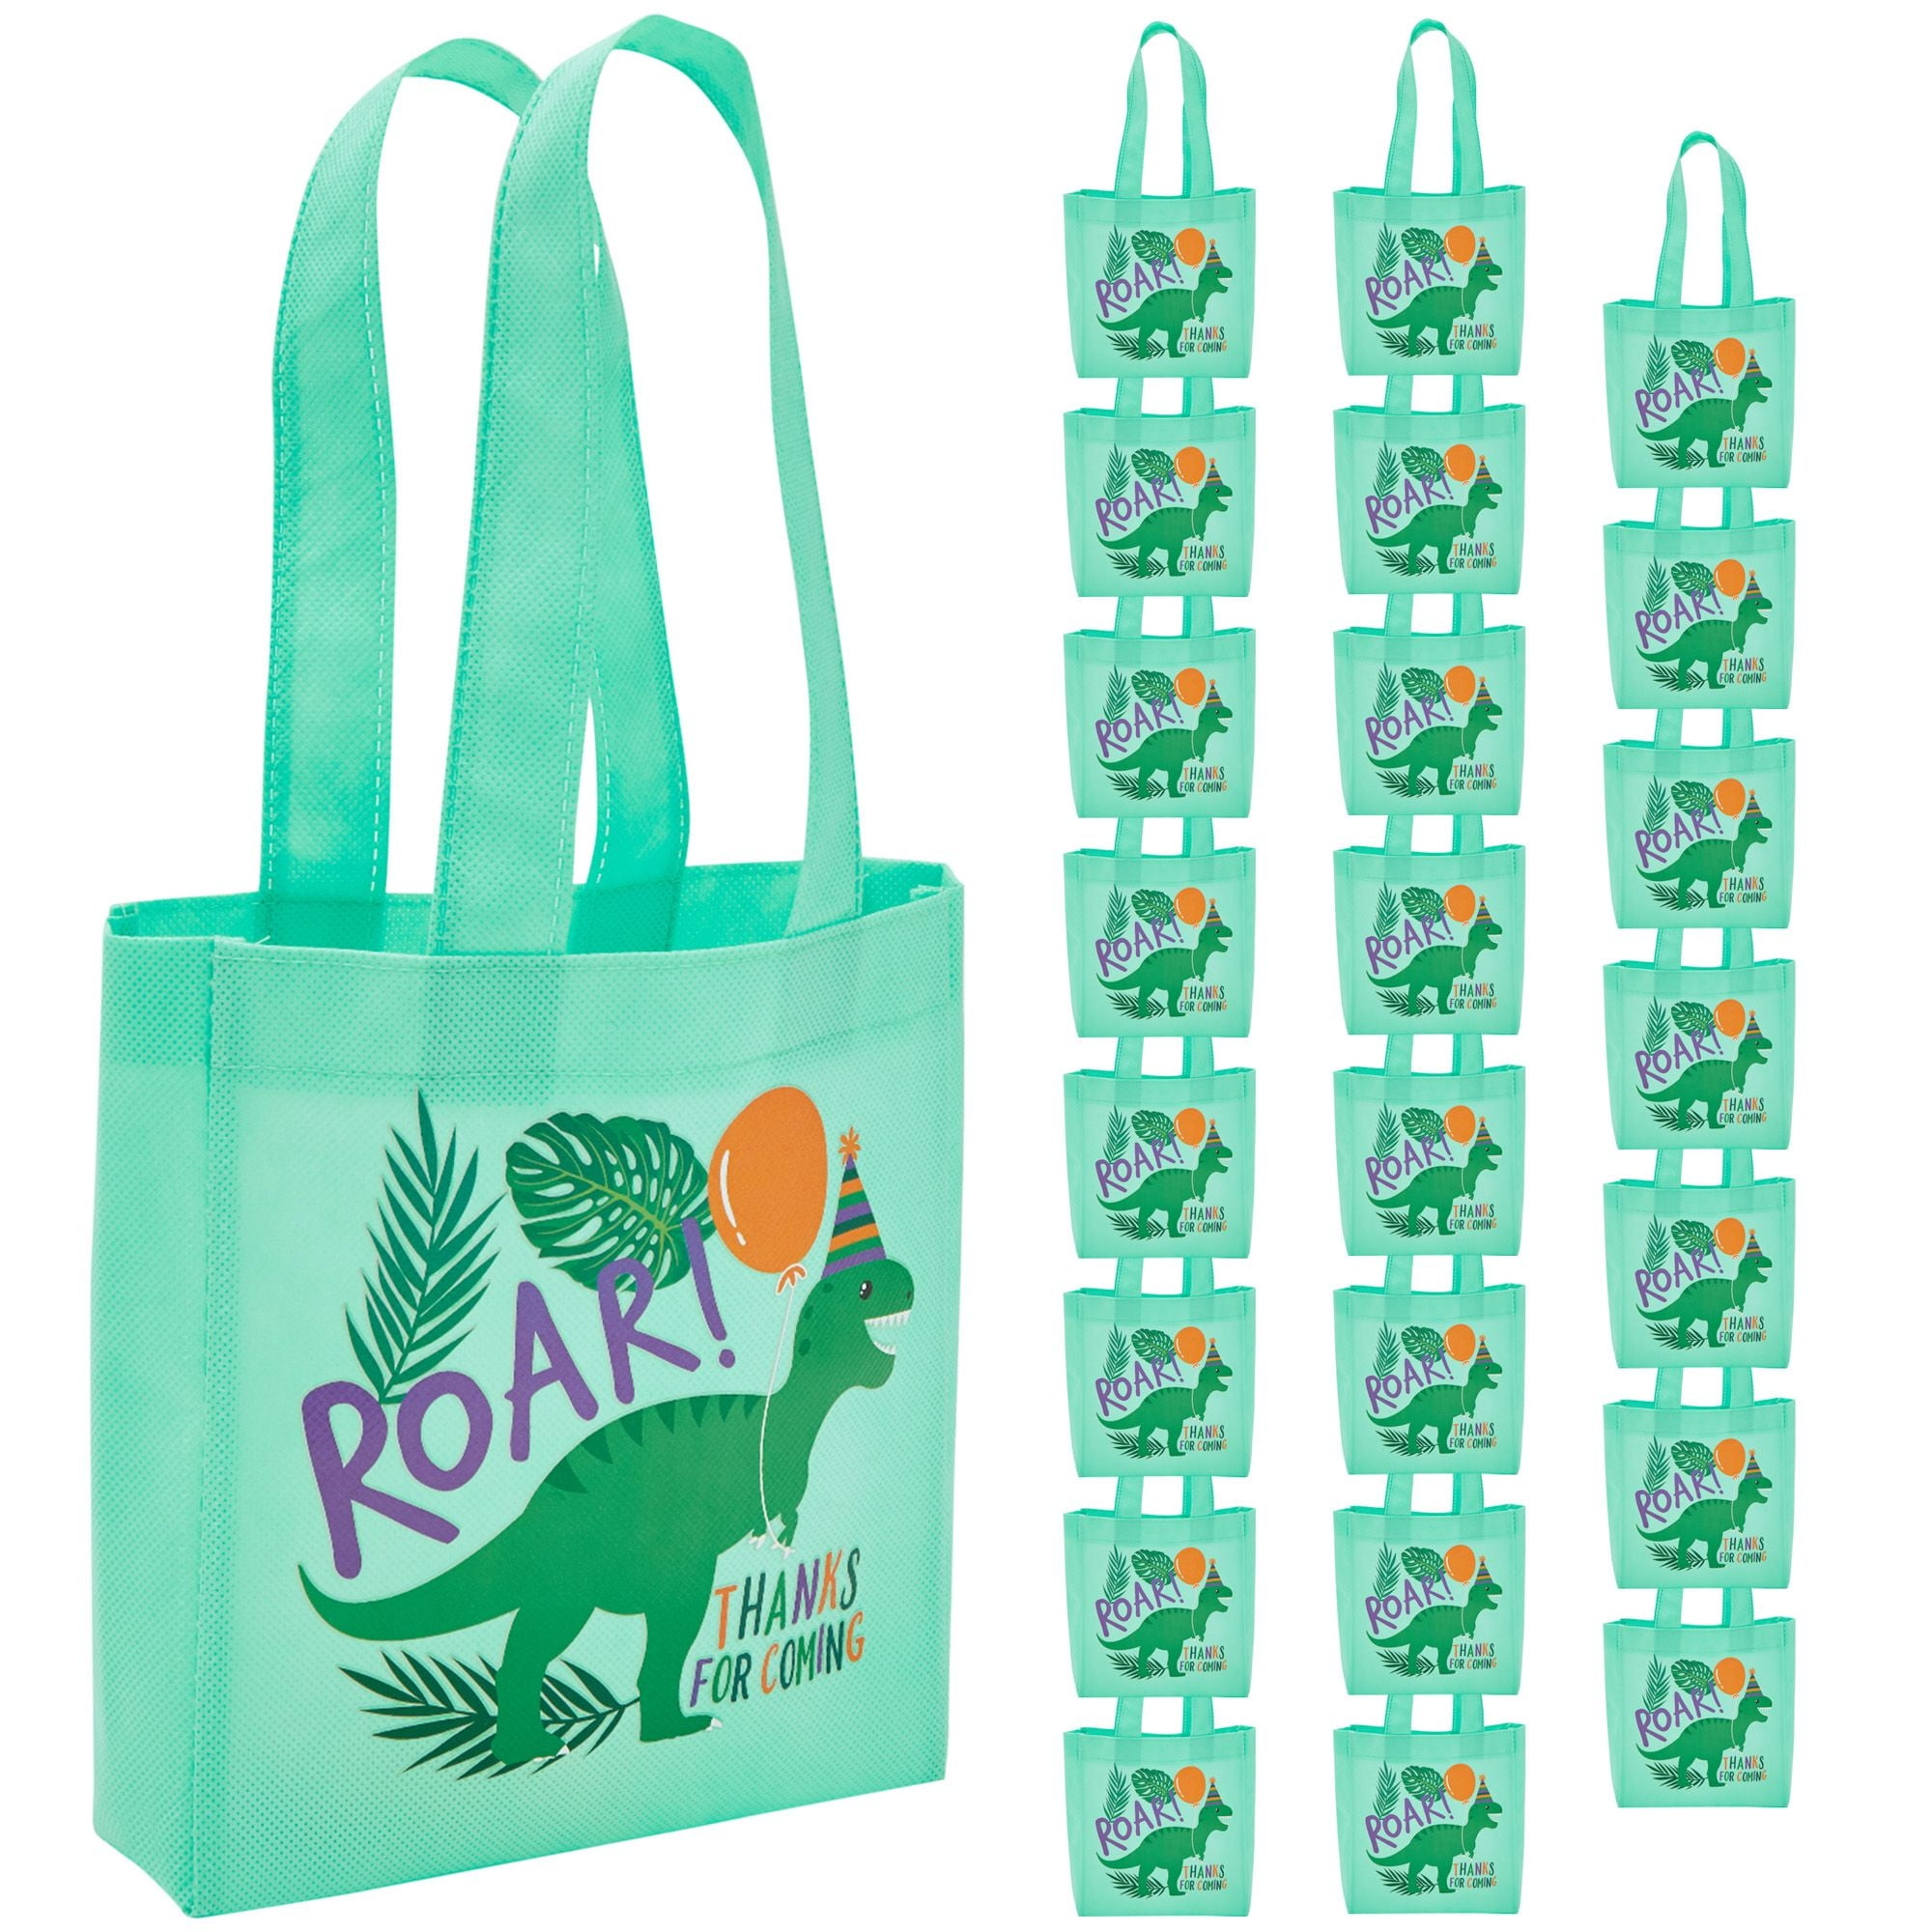 Mocoosy 24 Pack Dinosaur Party Favor Bags - Kids Mutilcolor Goodie Bags for Birthday Party, Dino Candy Treat Bags Dinosaur Party Paper Gift Bags for